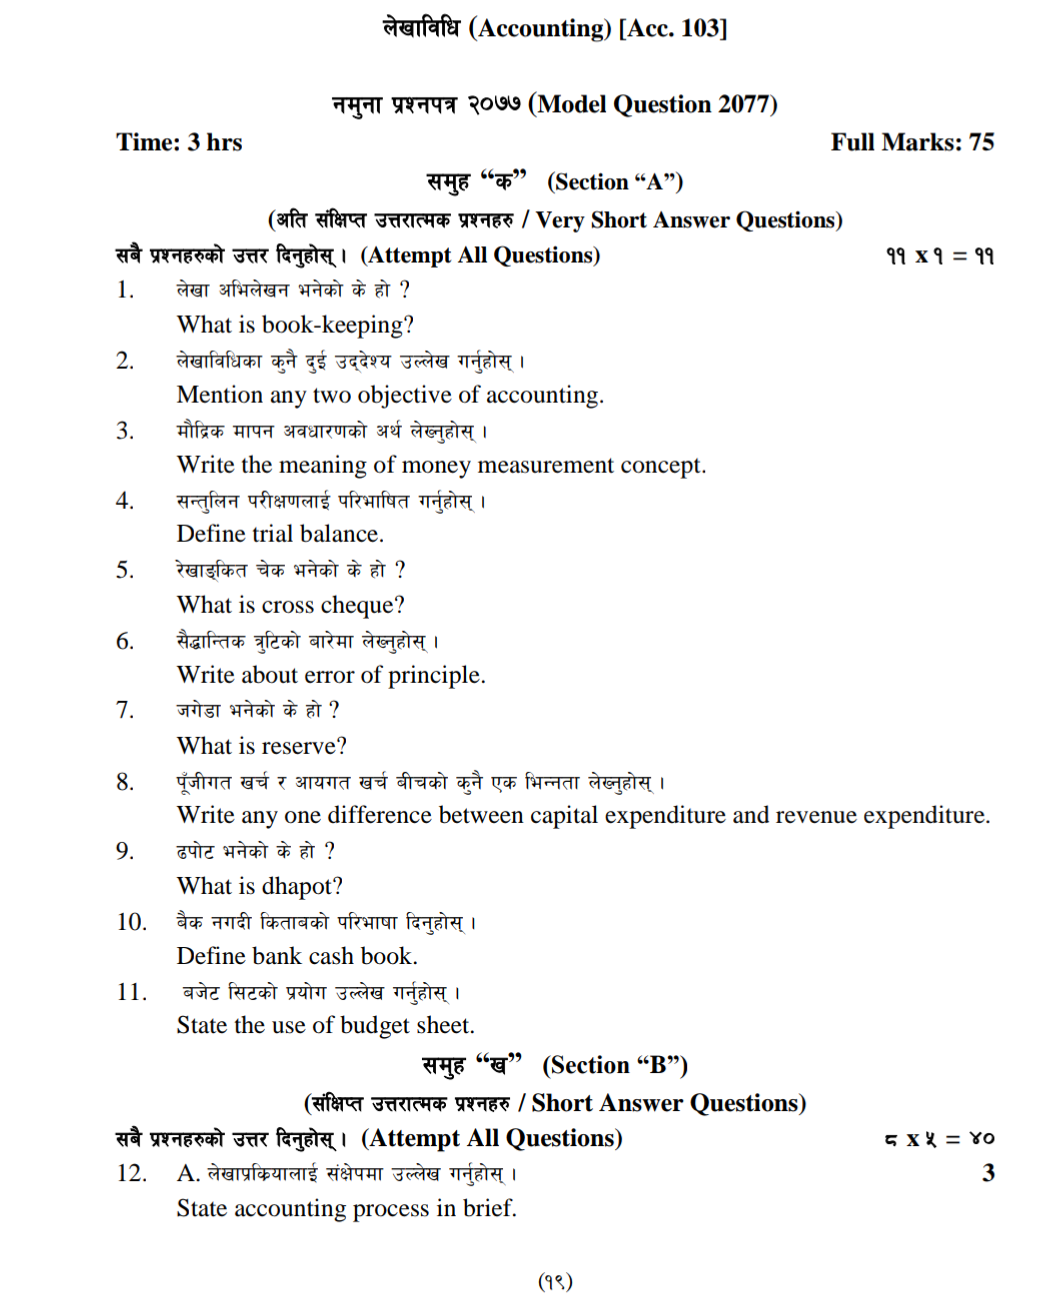 case study questions in accountancy class 11